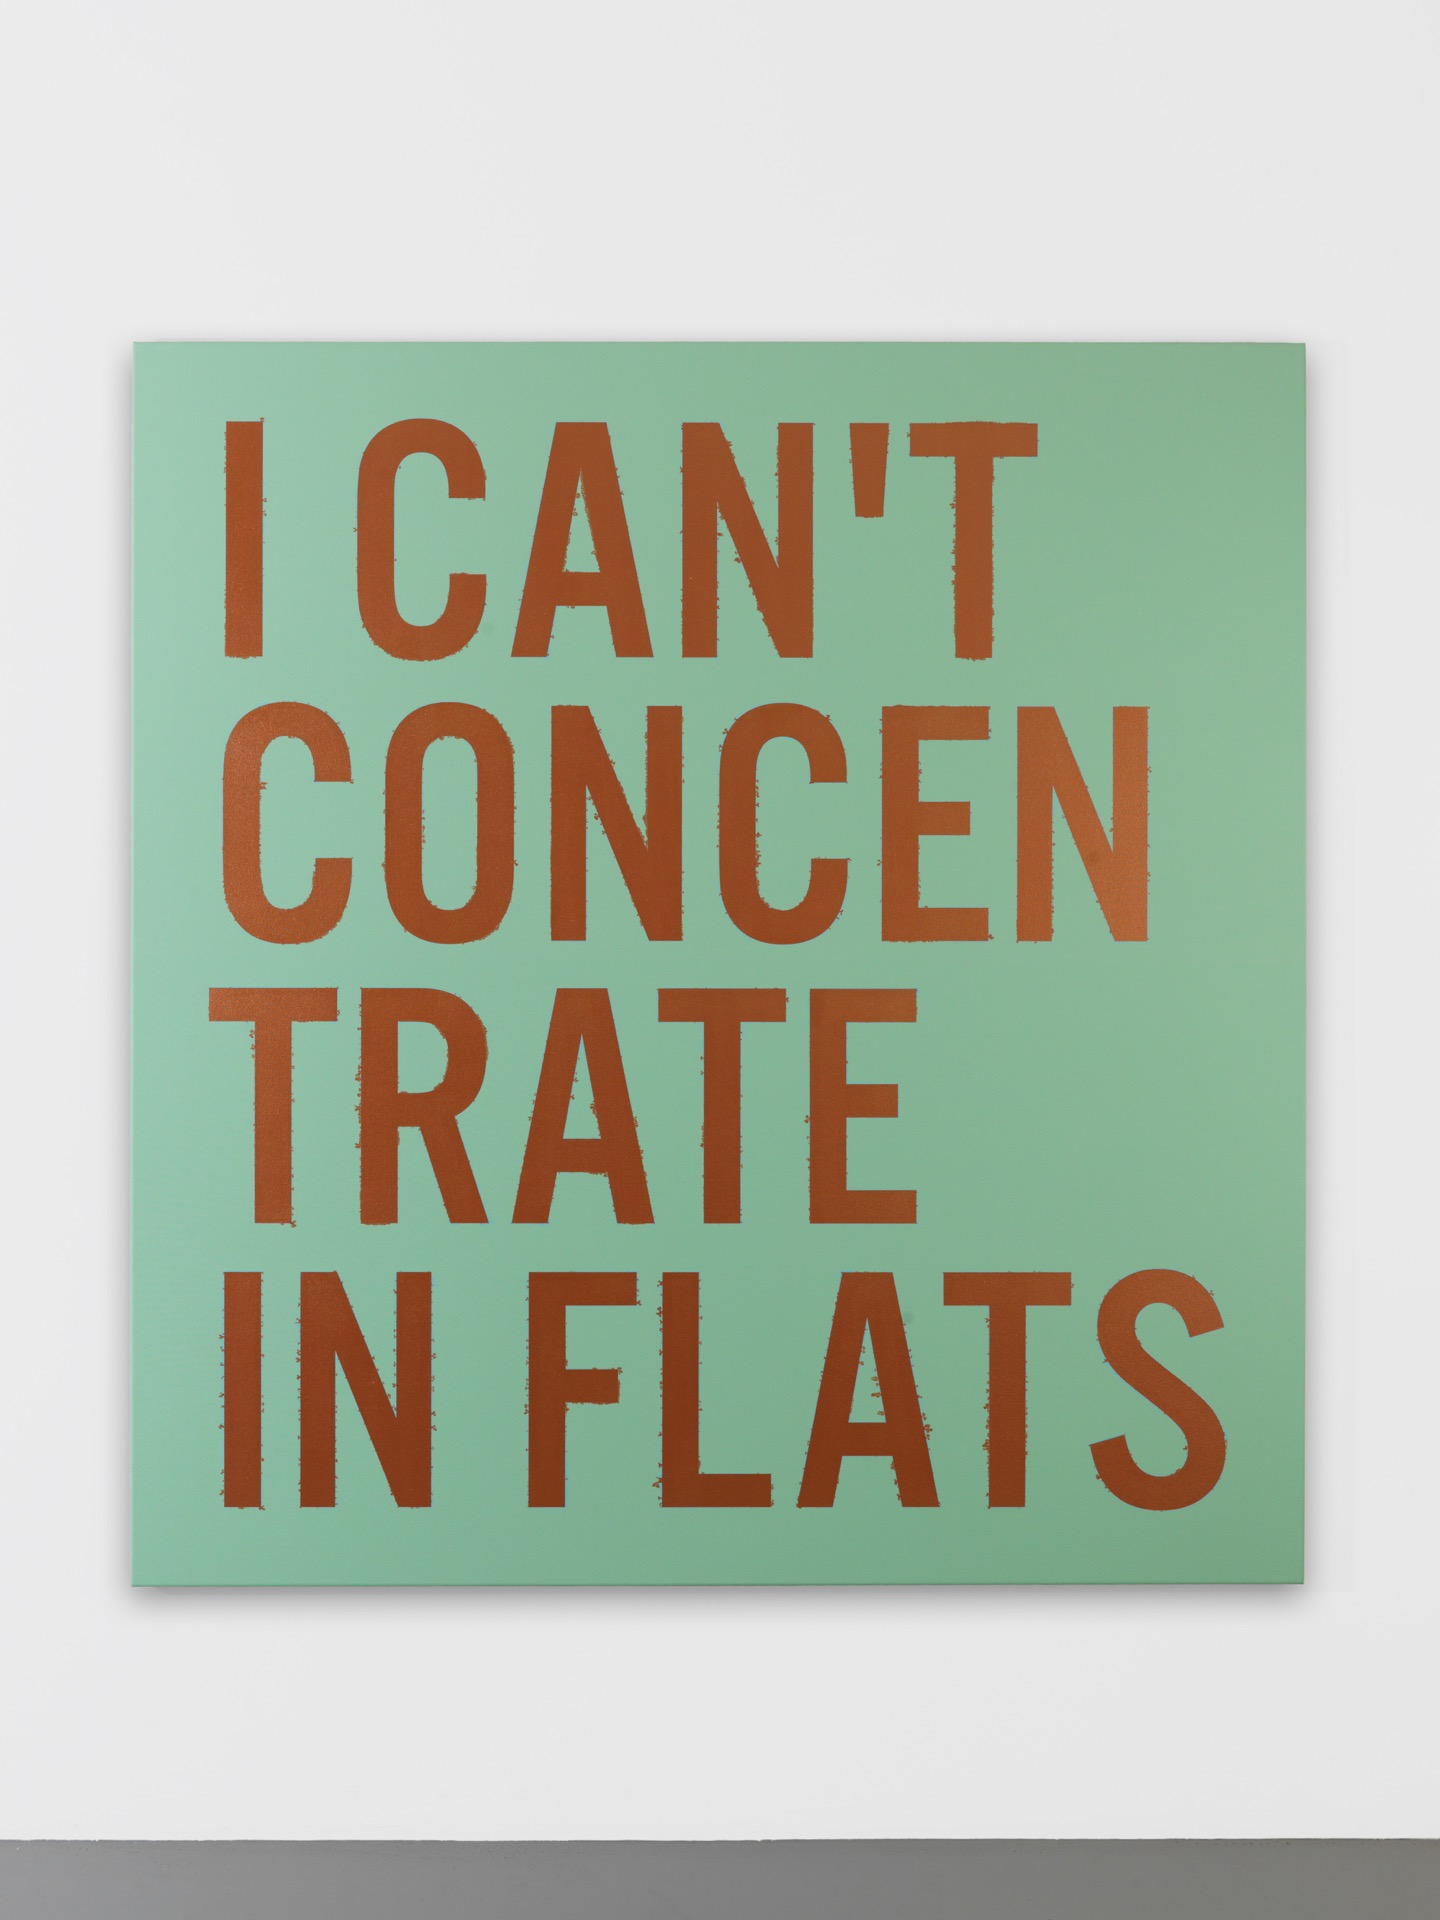 I can’t concentrate in flats